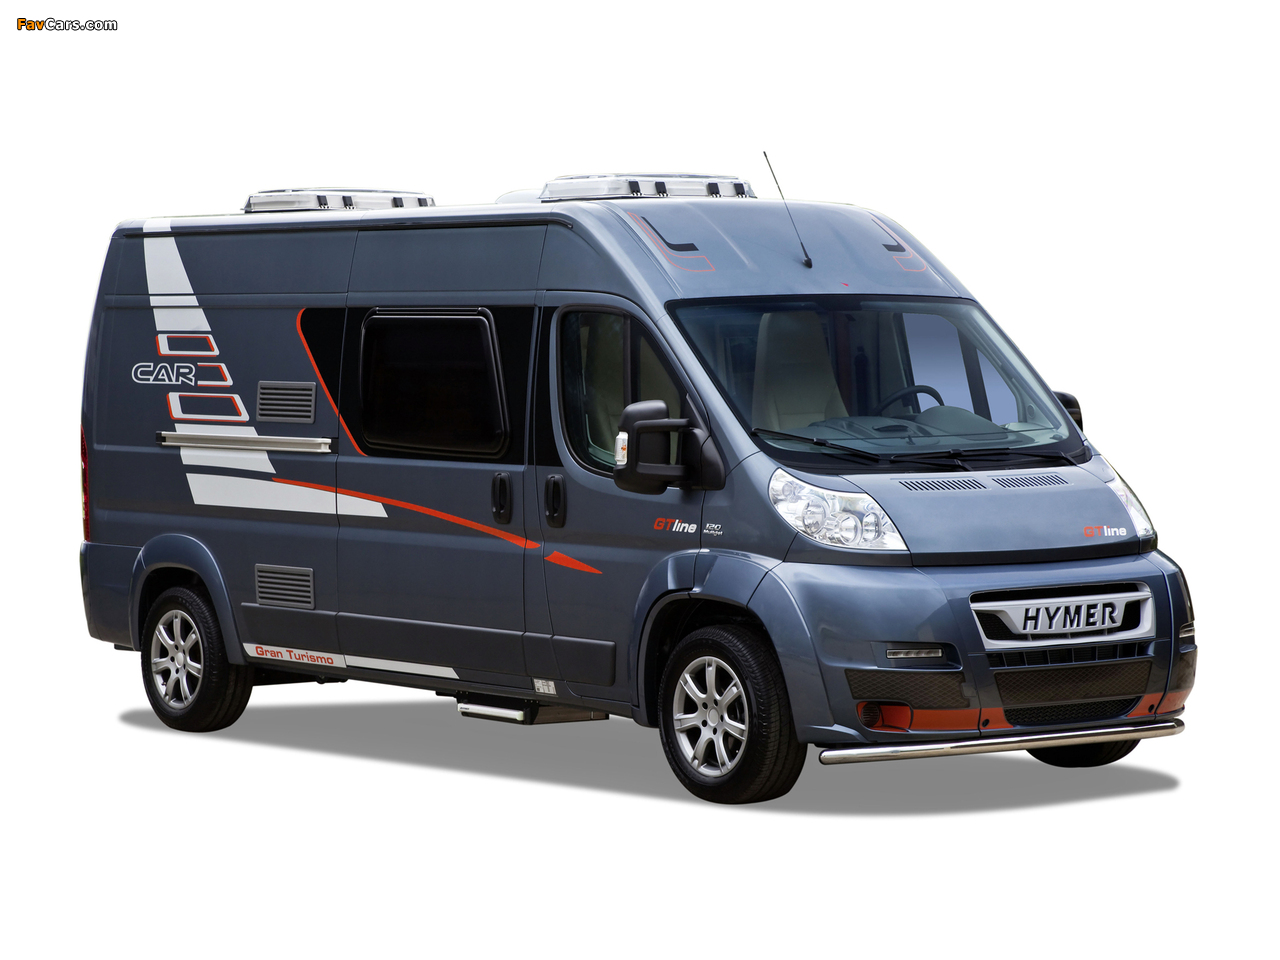 Hymer Car 322 GTline 2011 pictures (1280 x 960)